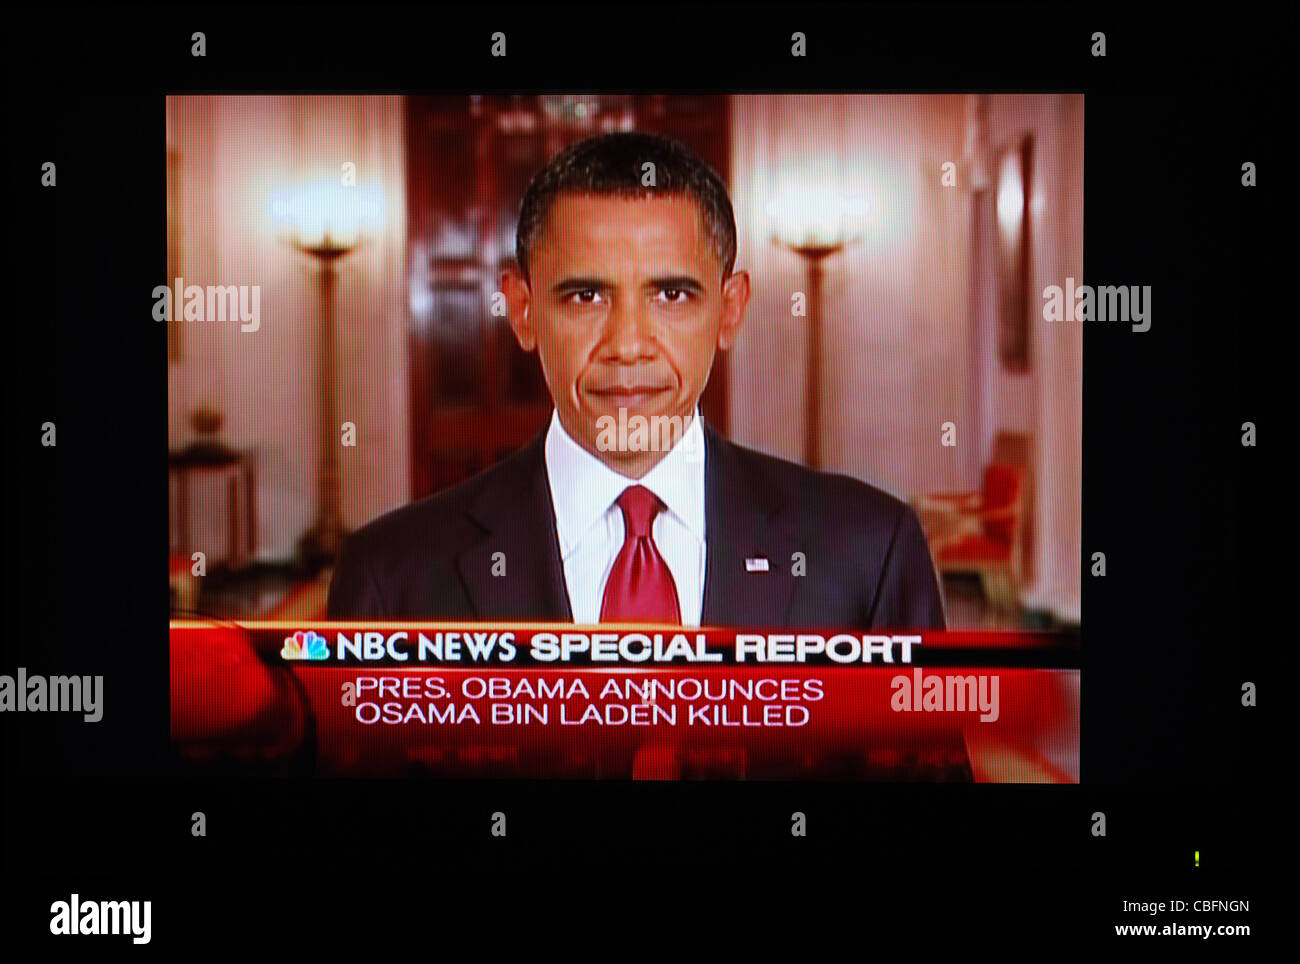 Us President Barack Obama Announcing The Death Of Osama Bin Laden May 2 11 On Nbc News Stock Photo Alamy